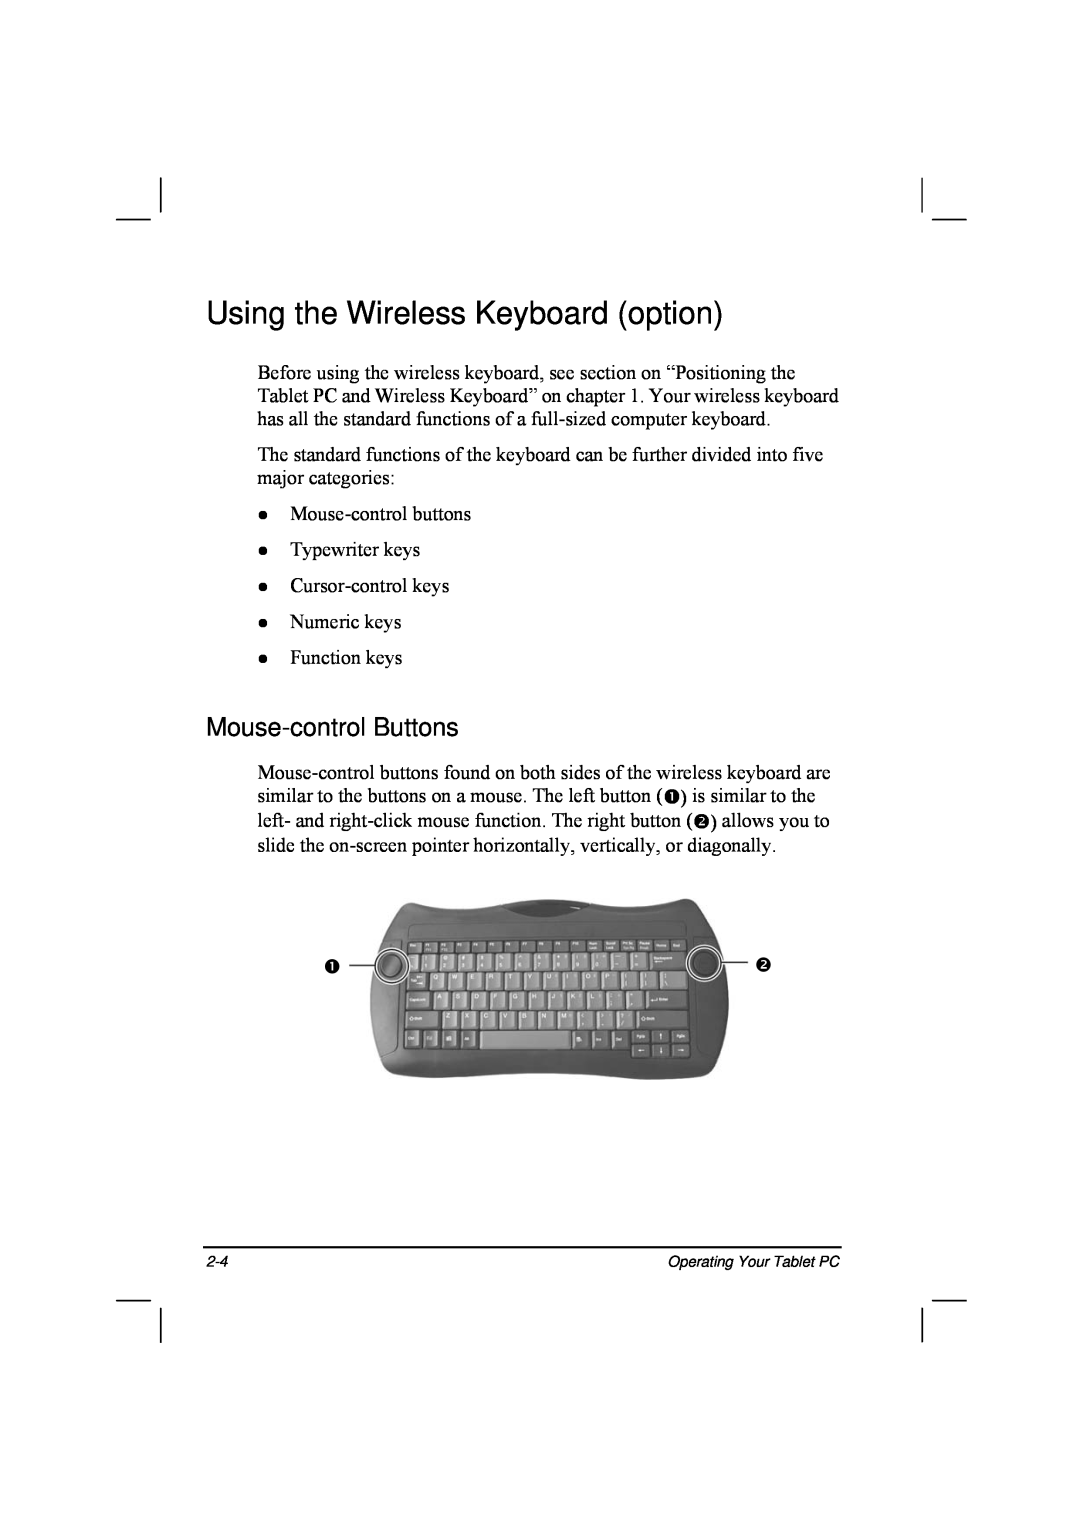 TAG 20 Series manual Using the Wireless Keyboard option, Mouse-control Buttons 